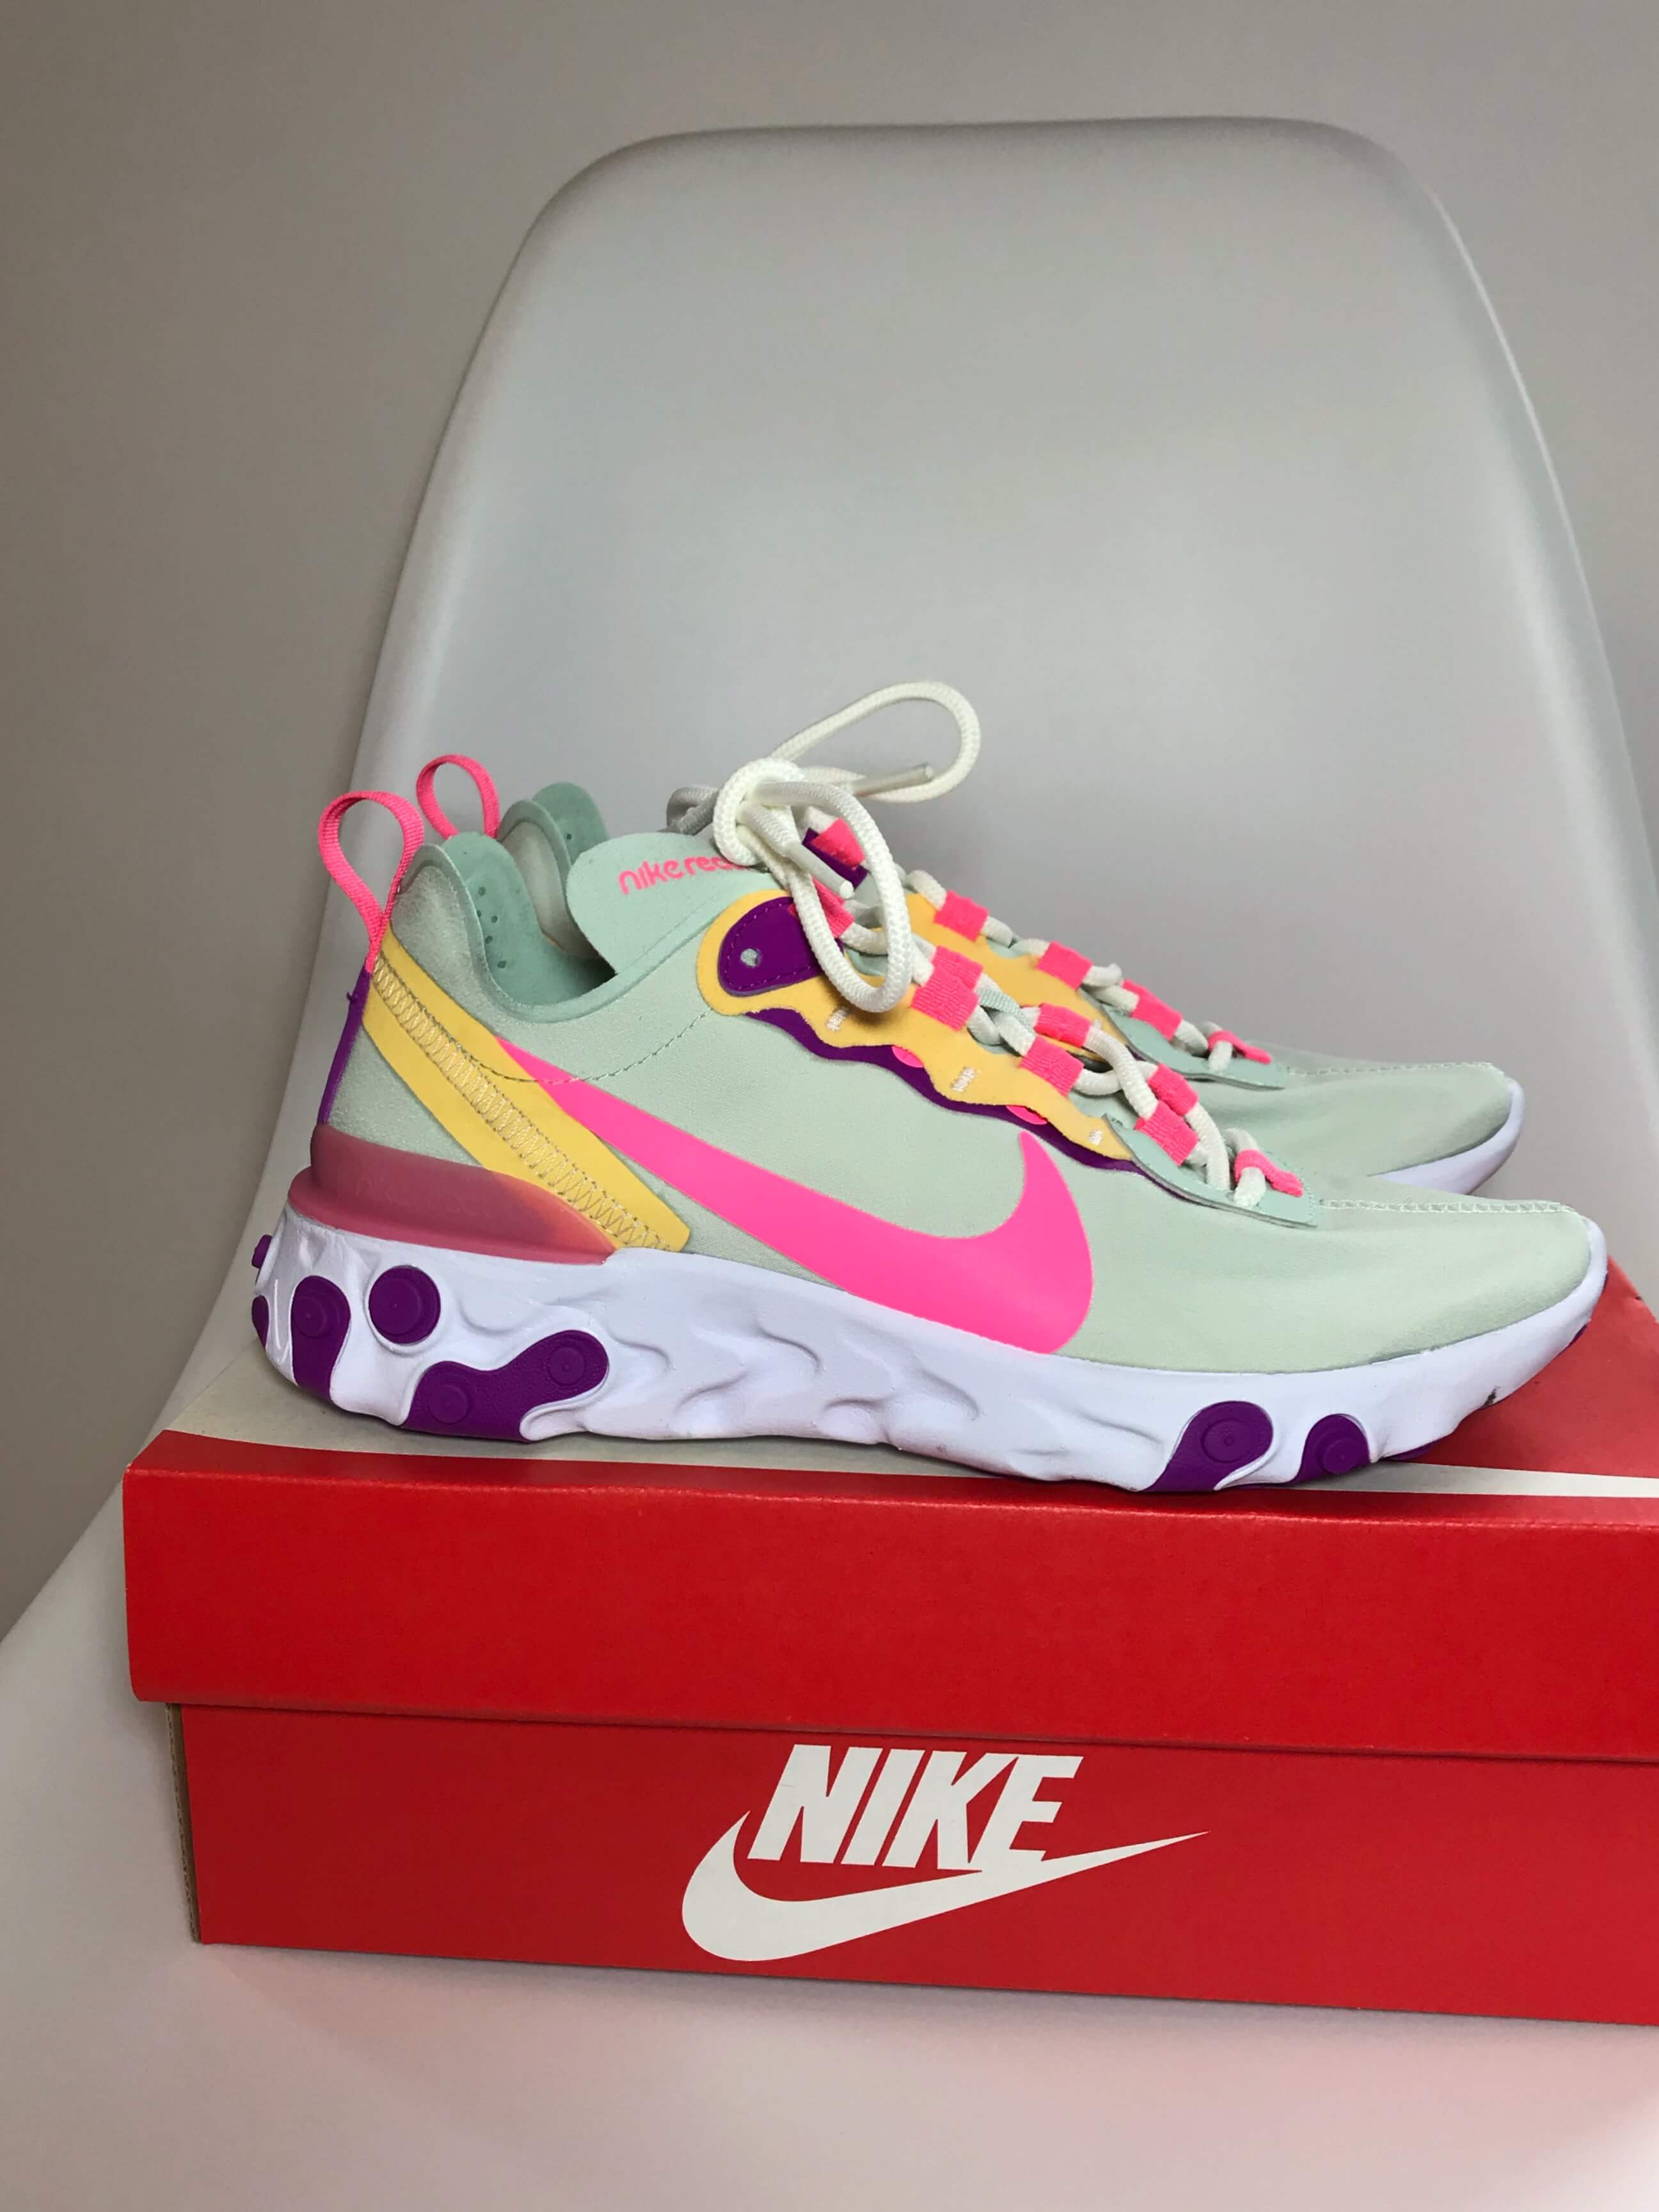 Nike React Element 55 para hombre y mujer. Black Friday 2020 